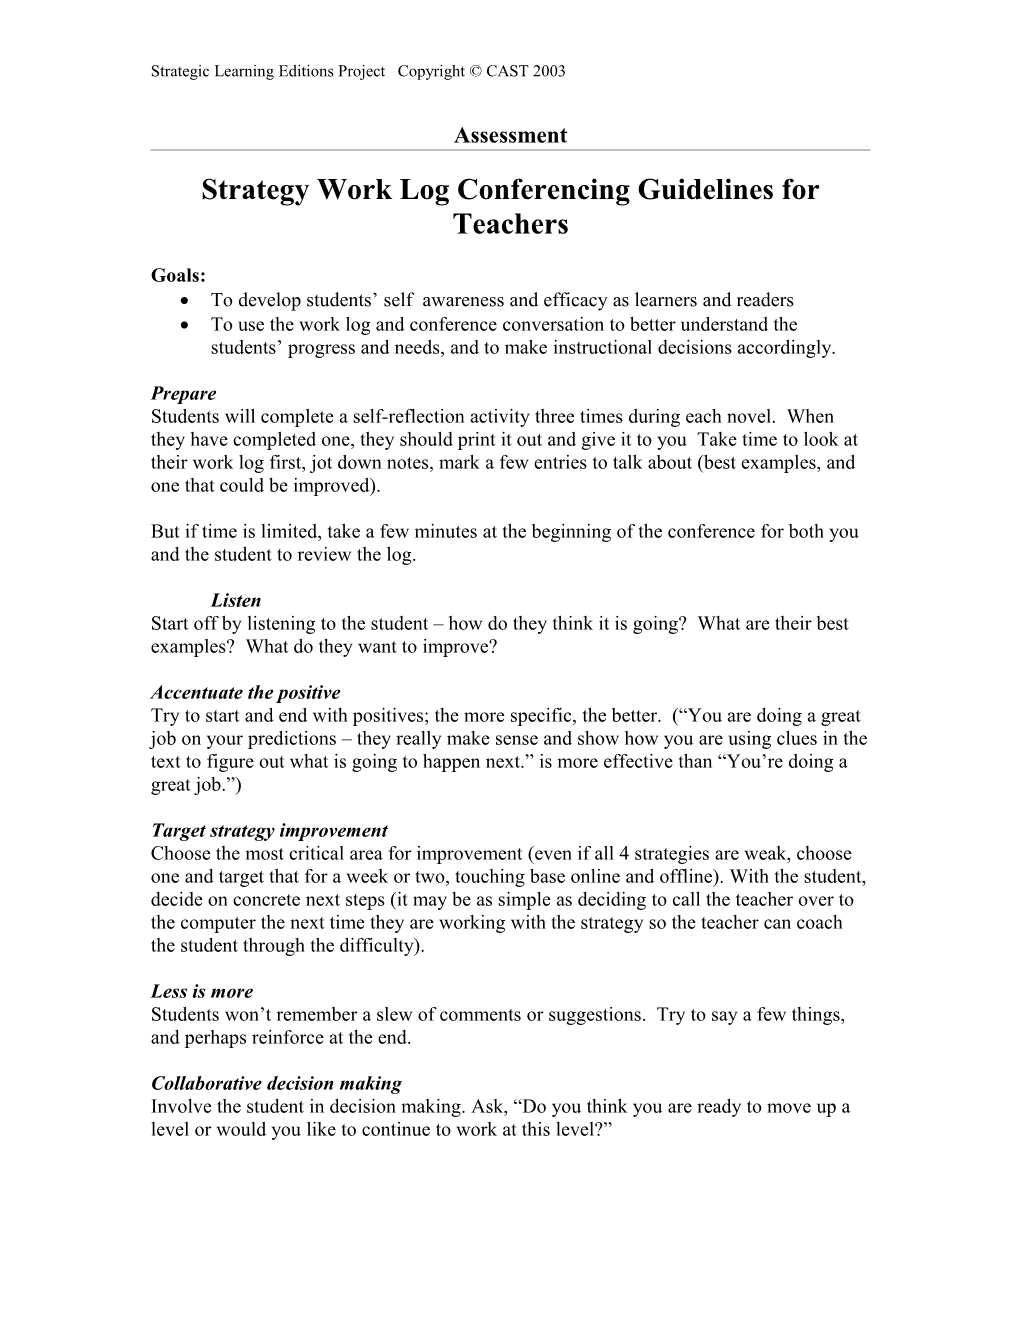 Strategy Work Log Conferencing Guidelines for Teachers